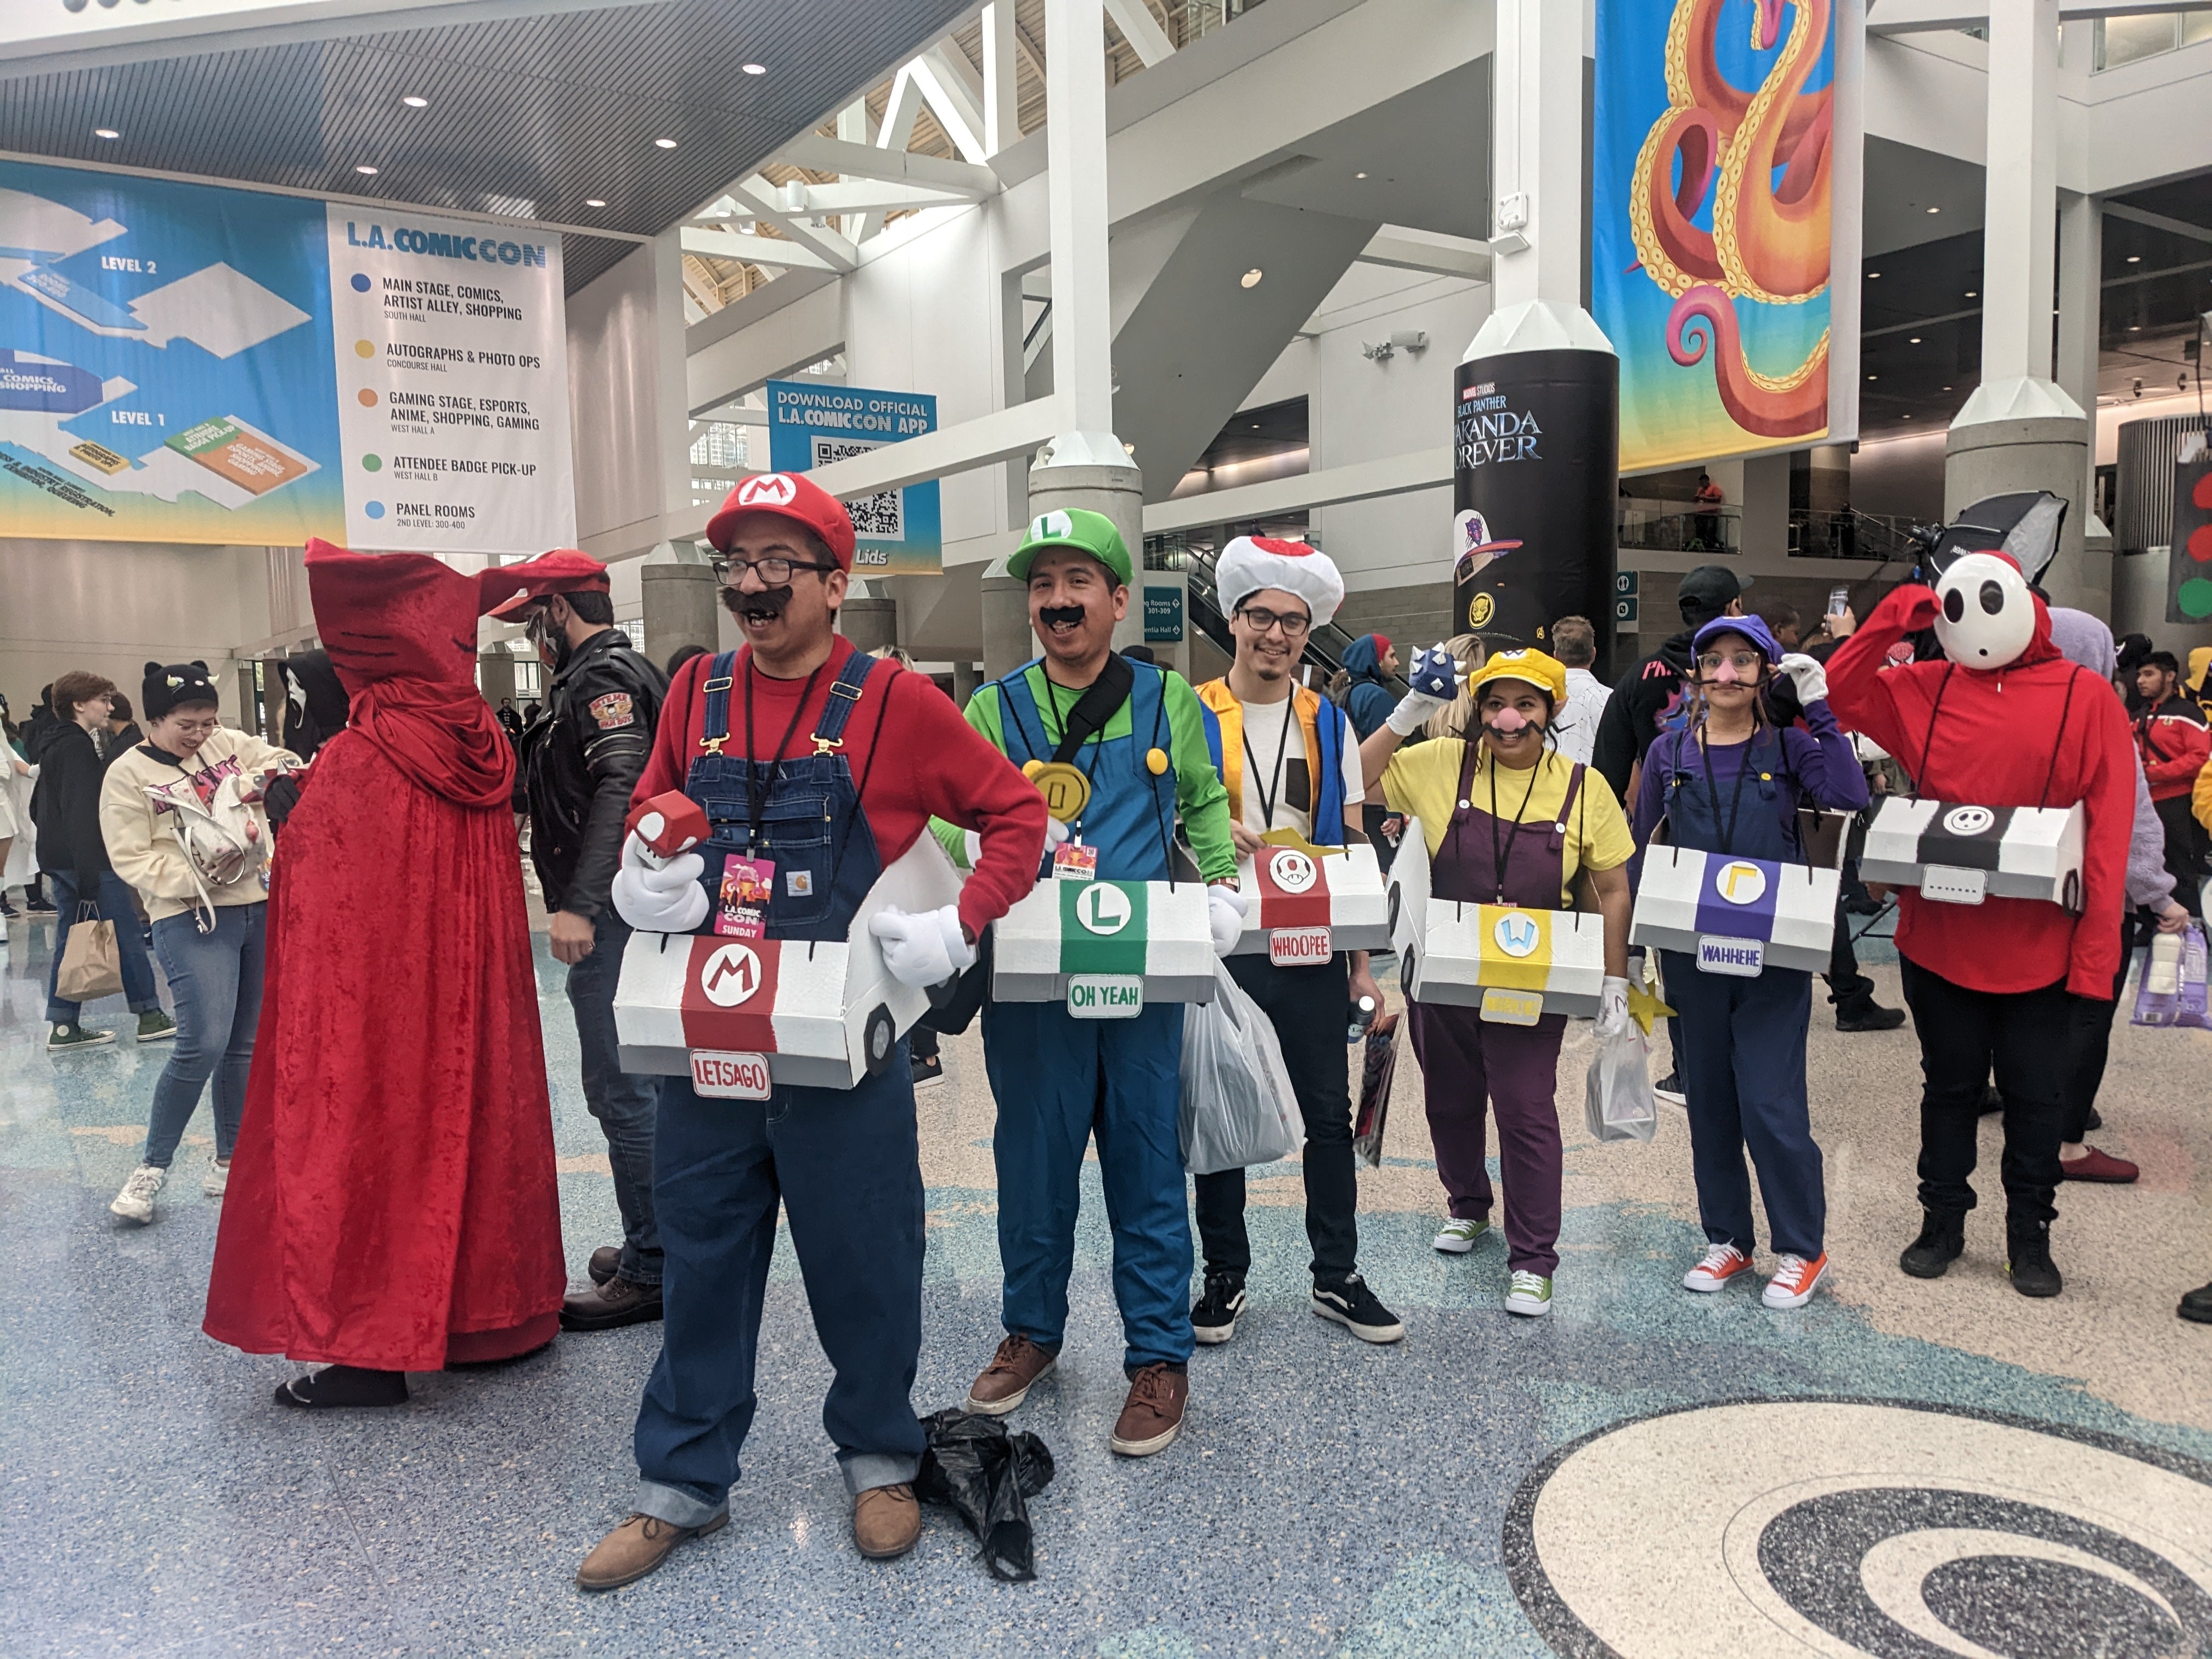 A photograph of six cosplayers dressed as MarioKart characters